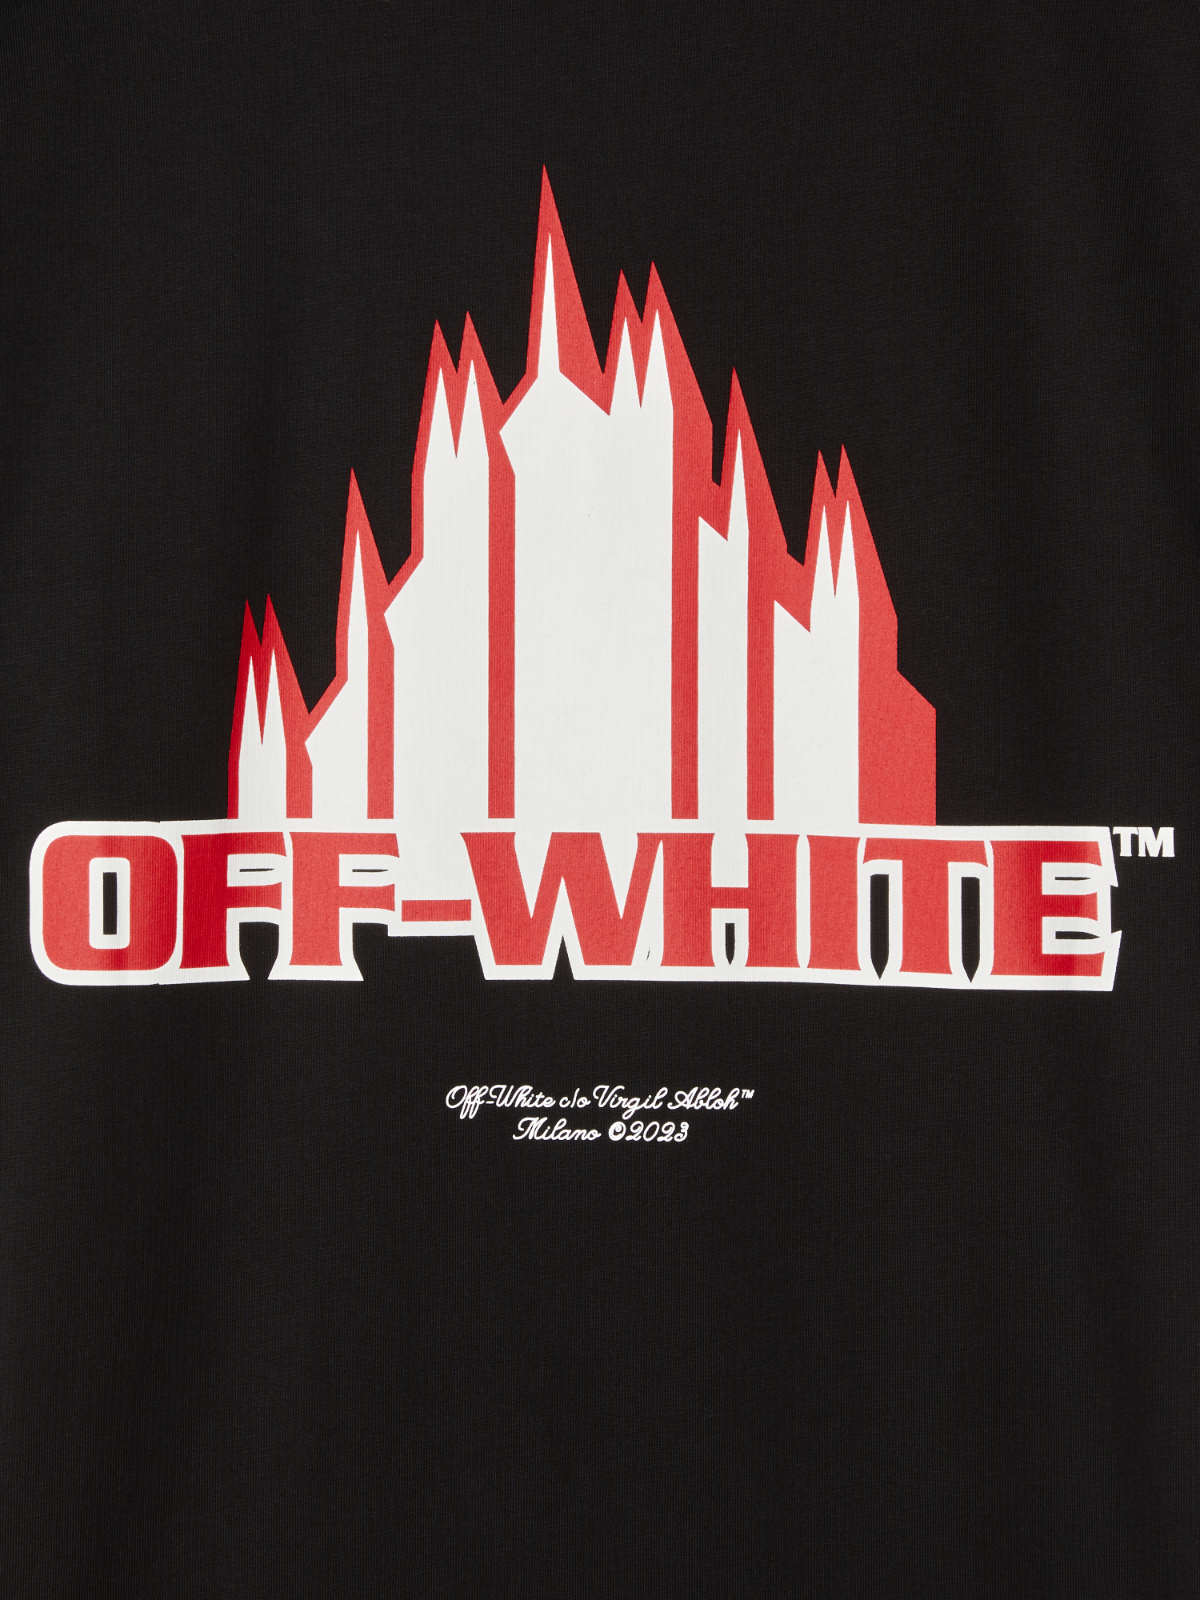 Off-White™ Drops A Limited Edition Capsule Collection Celebrating Local And Global Culture